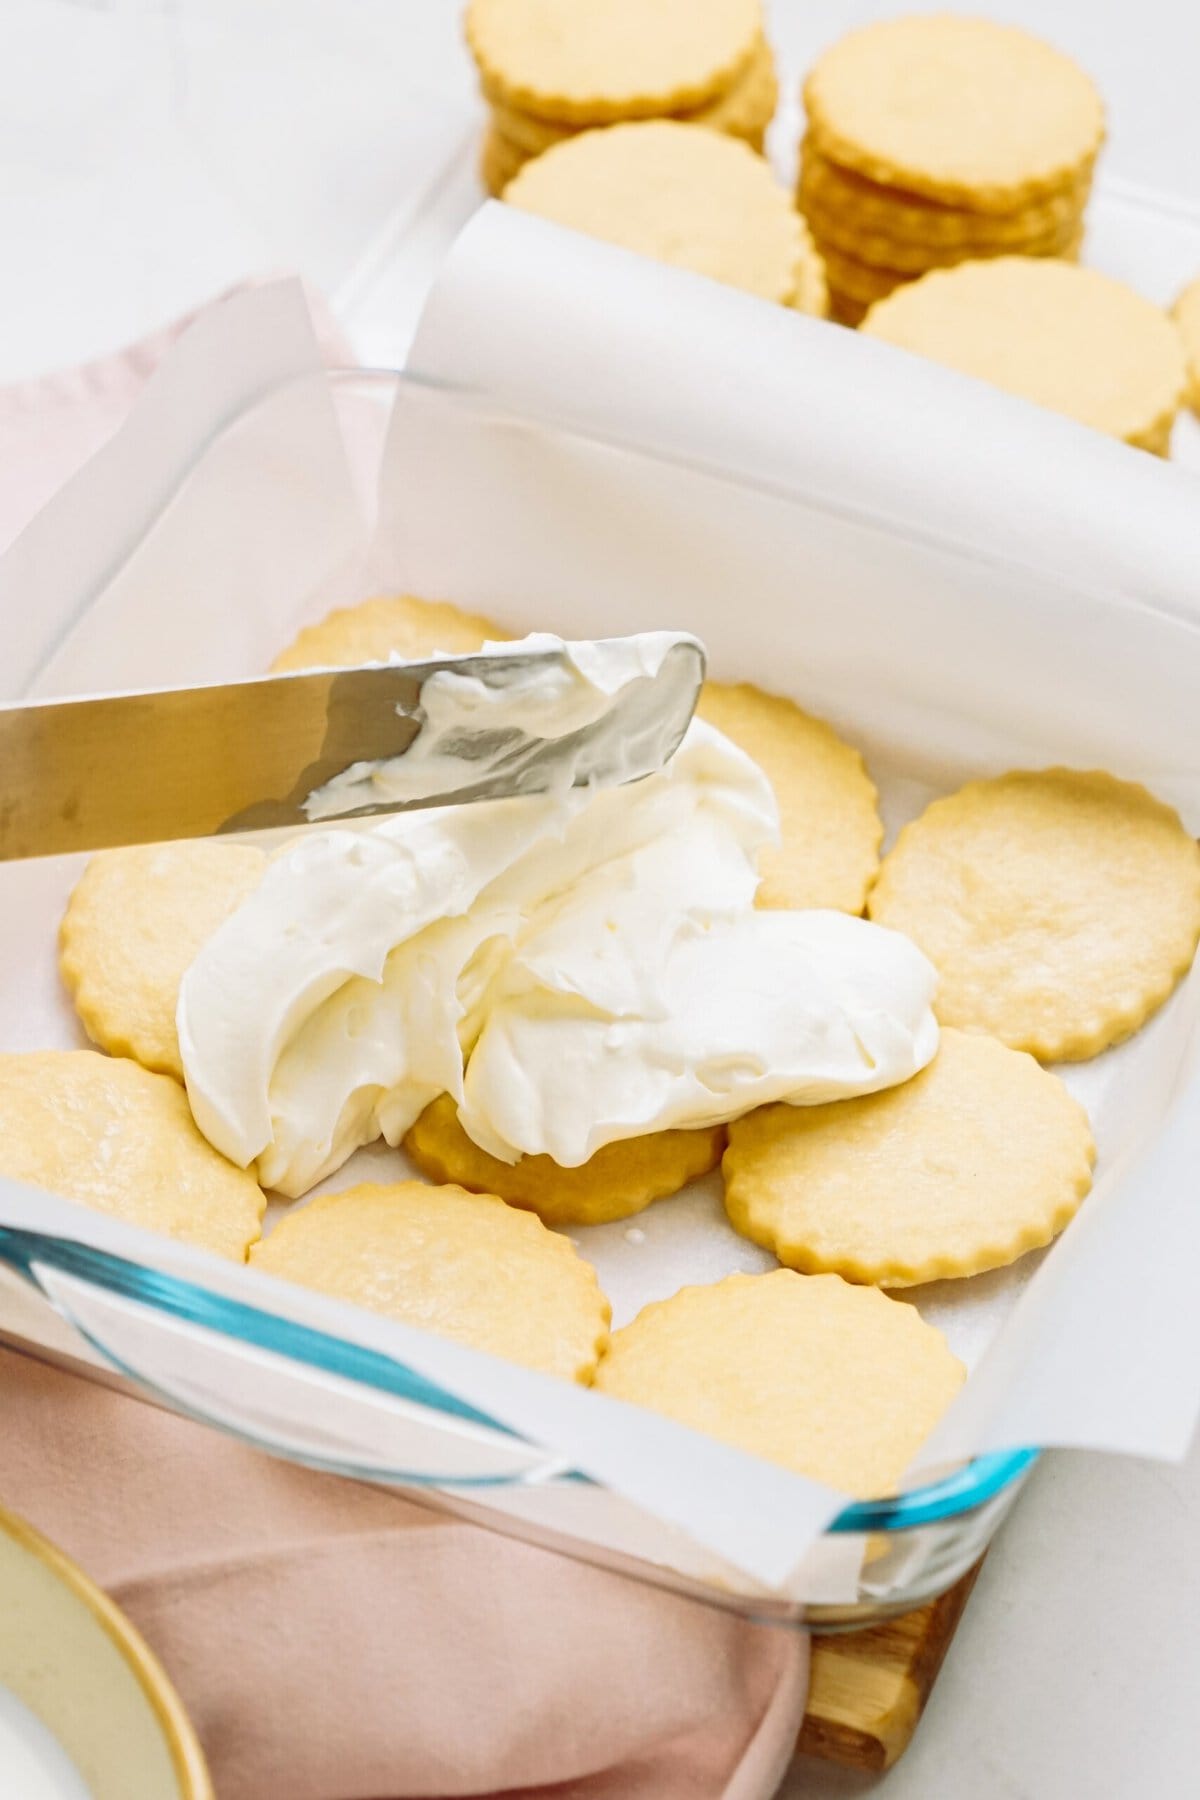 Spreading lemon icebox cake filling over a layer of shortbread cookies